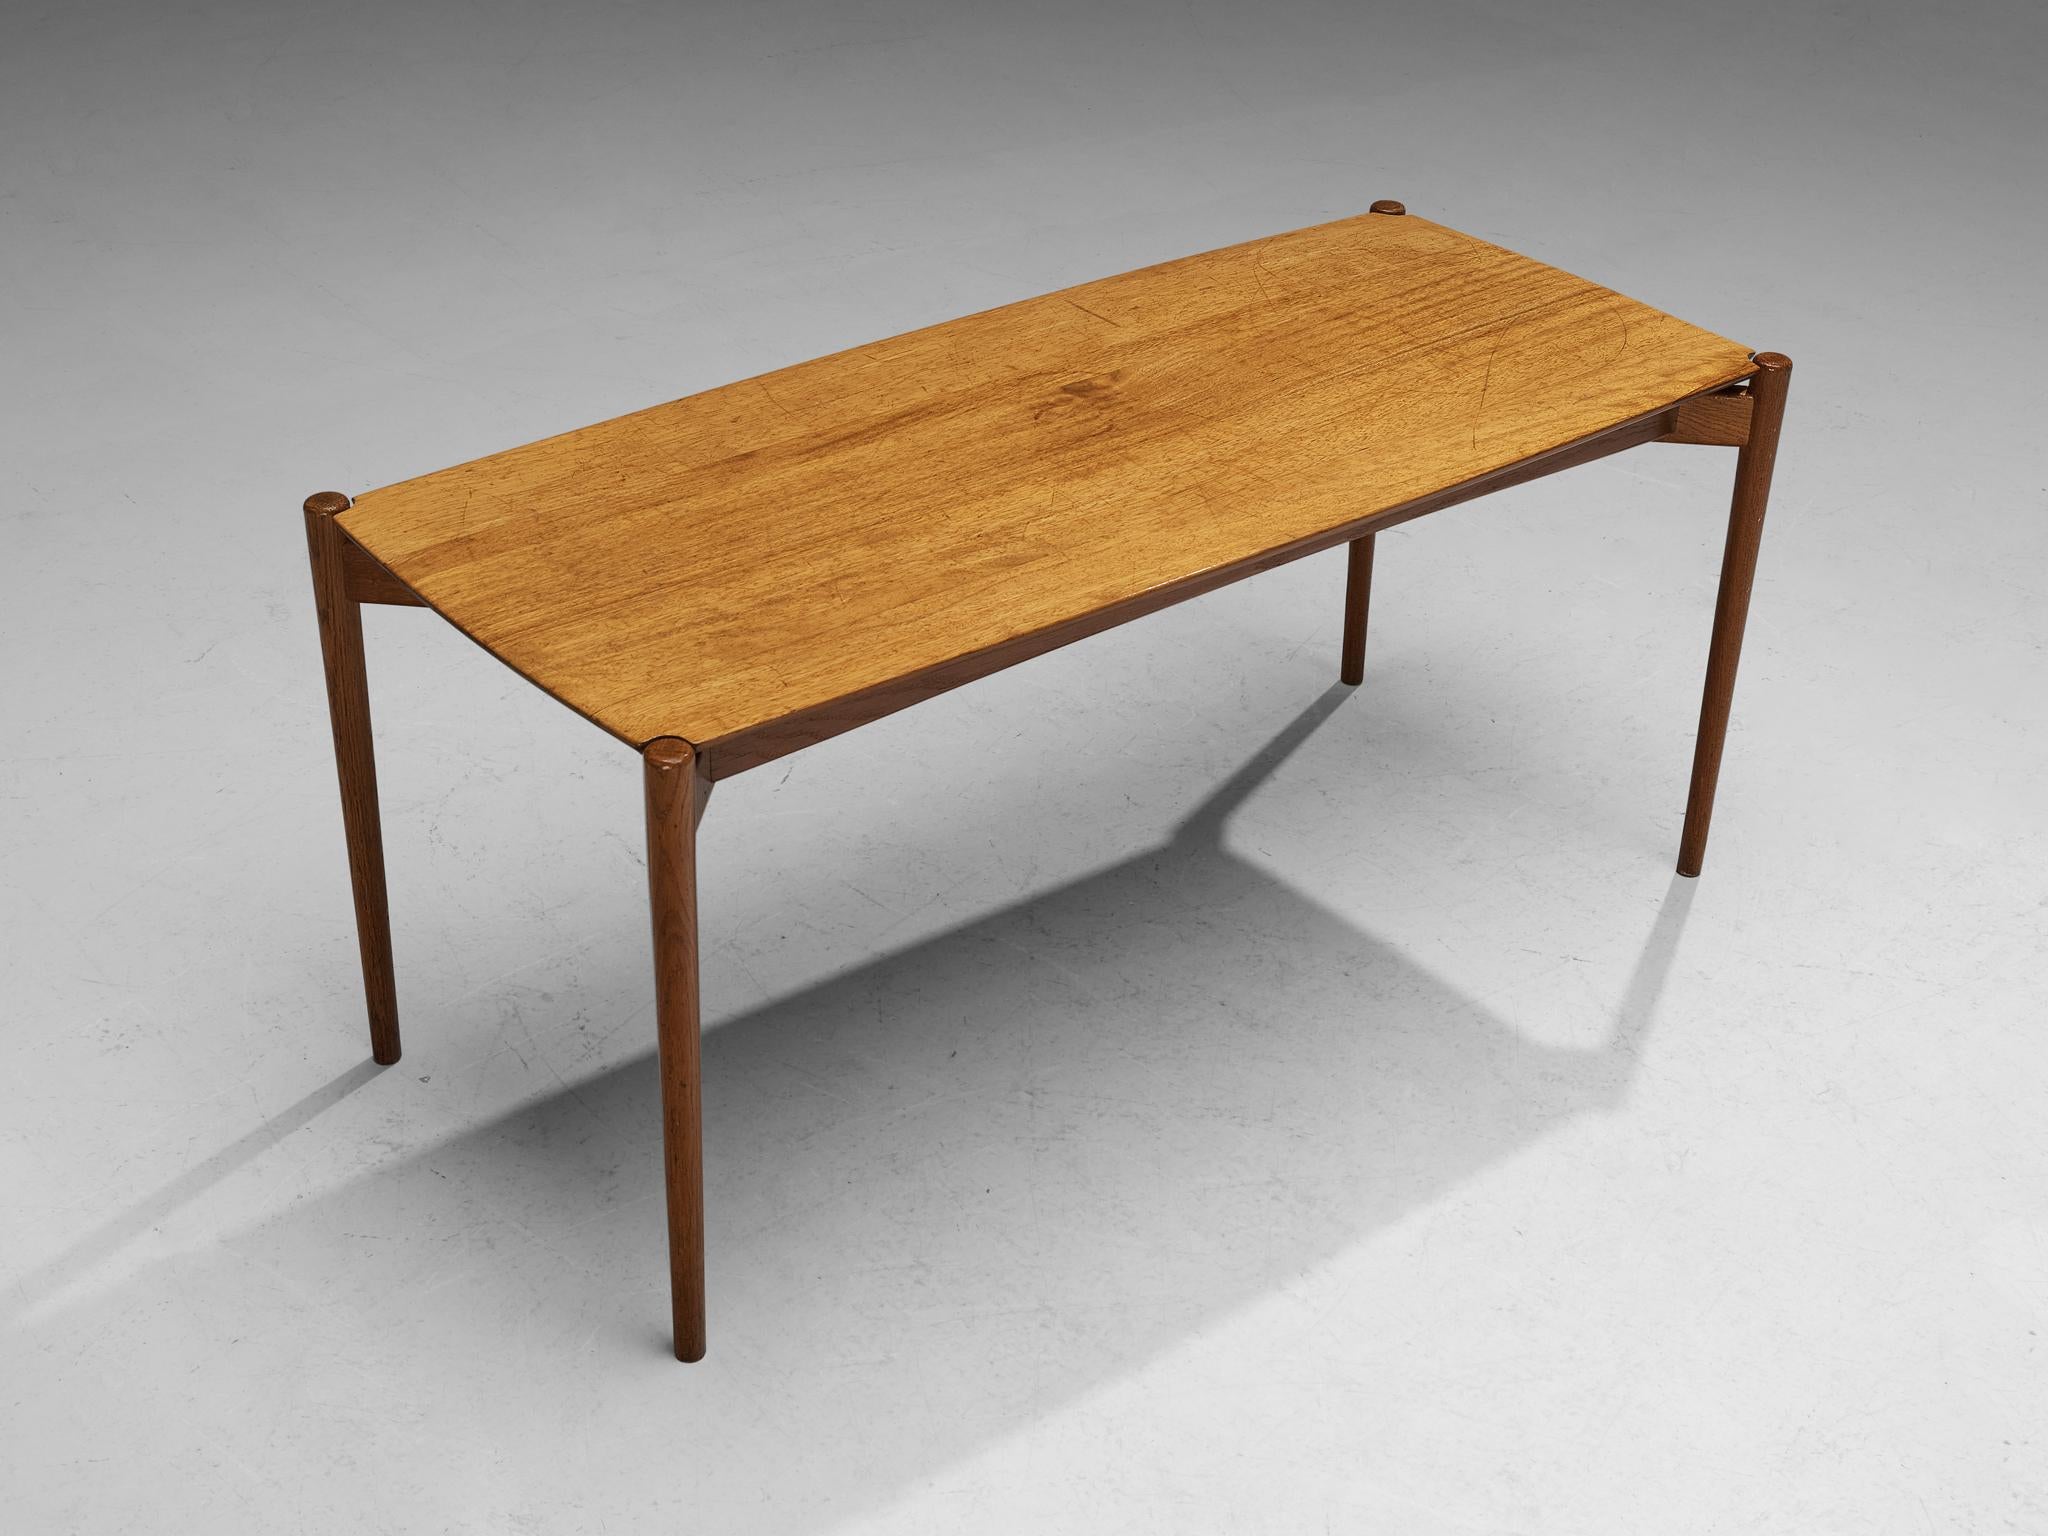 Coffee table, oak, mahogany, Scandinavia, 1960s

The design shows a strong and solid construction. This is realized by the sharp and clear lines which are visible in the rectangular top. The elegancy of the table is achieved through the elongated,